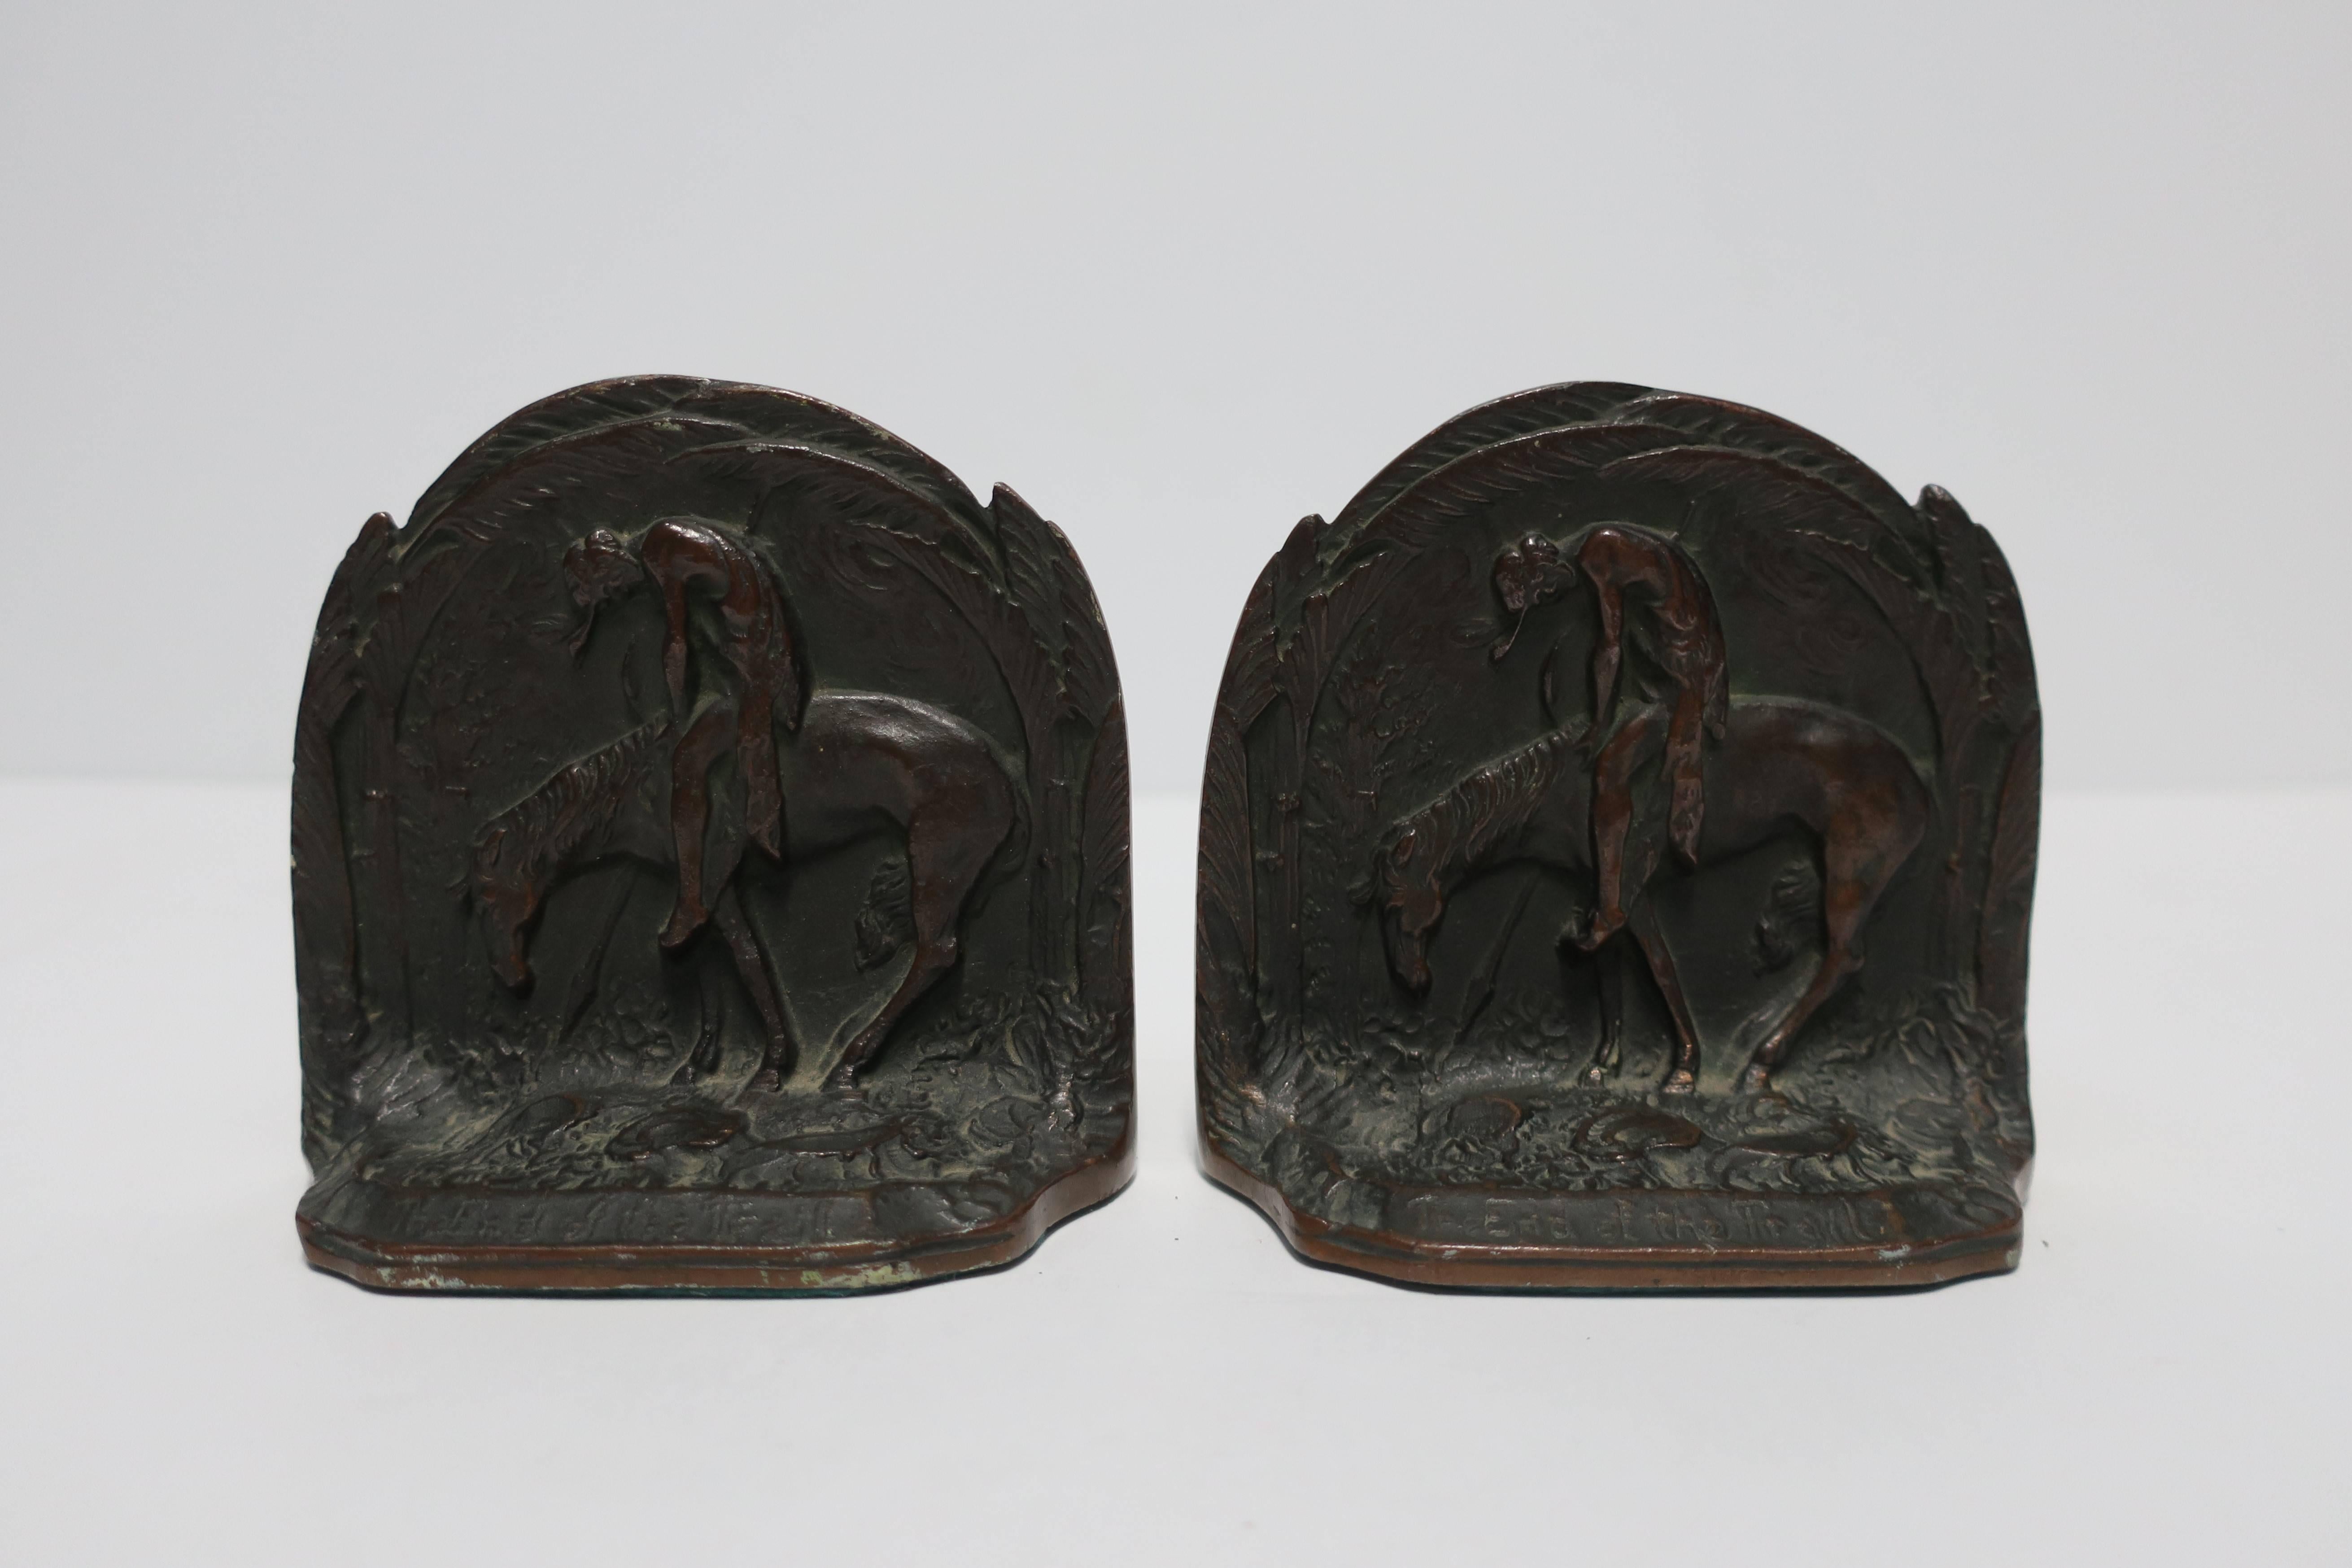 Pair/set available here $475
A beautiful detailed pair of early 20th Century American solid bronze horse and rider bookends. Engraved on front, 'End of The Road', and on back, 'Solid Bronze', as show in images.

Pair available here online. By